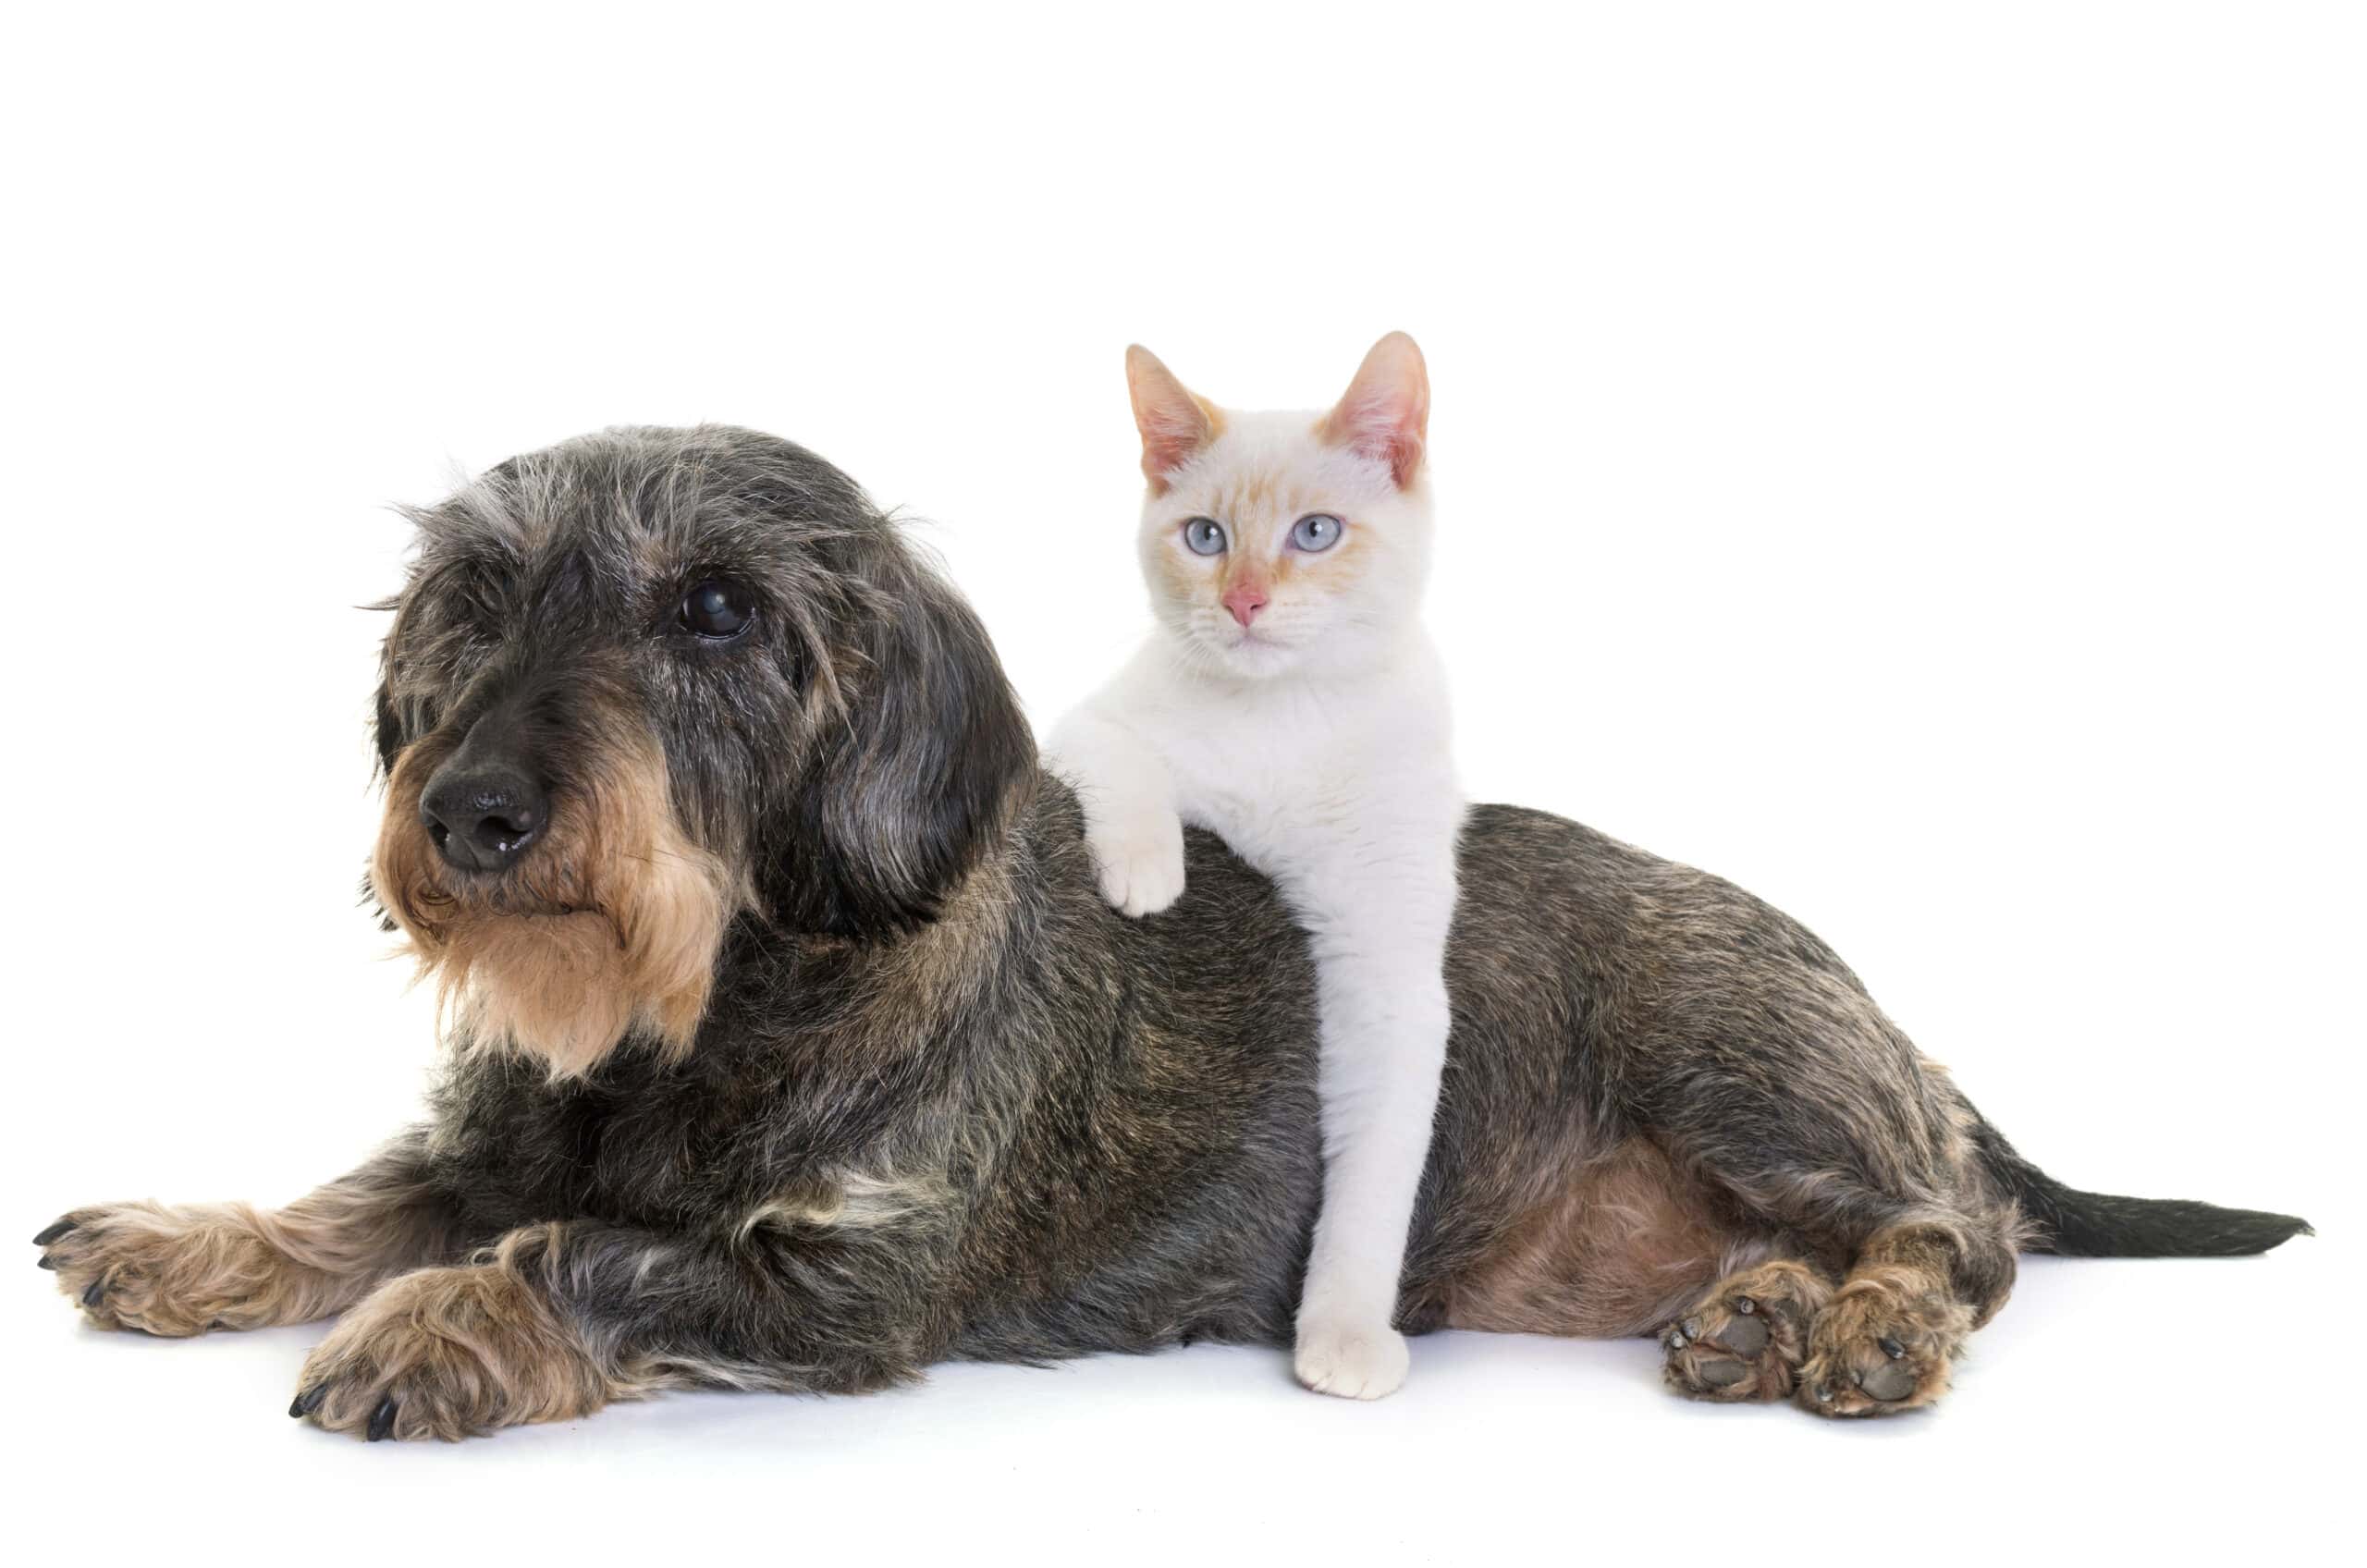 Senior Pets: Caring For Your Aging Dog Or Cat